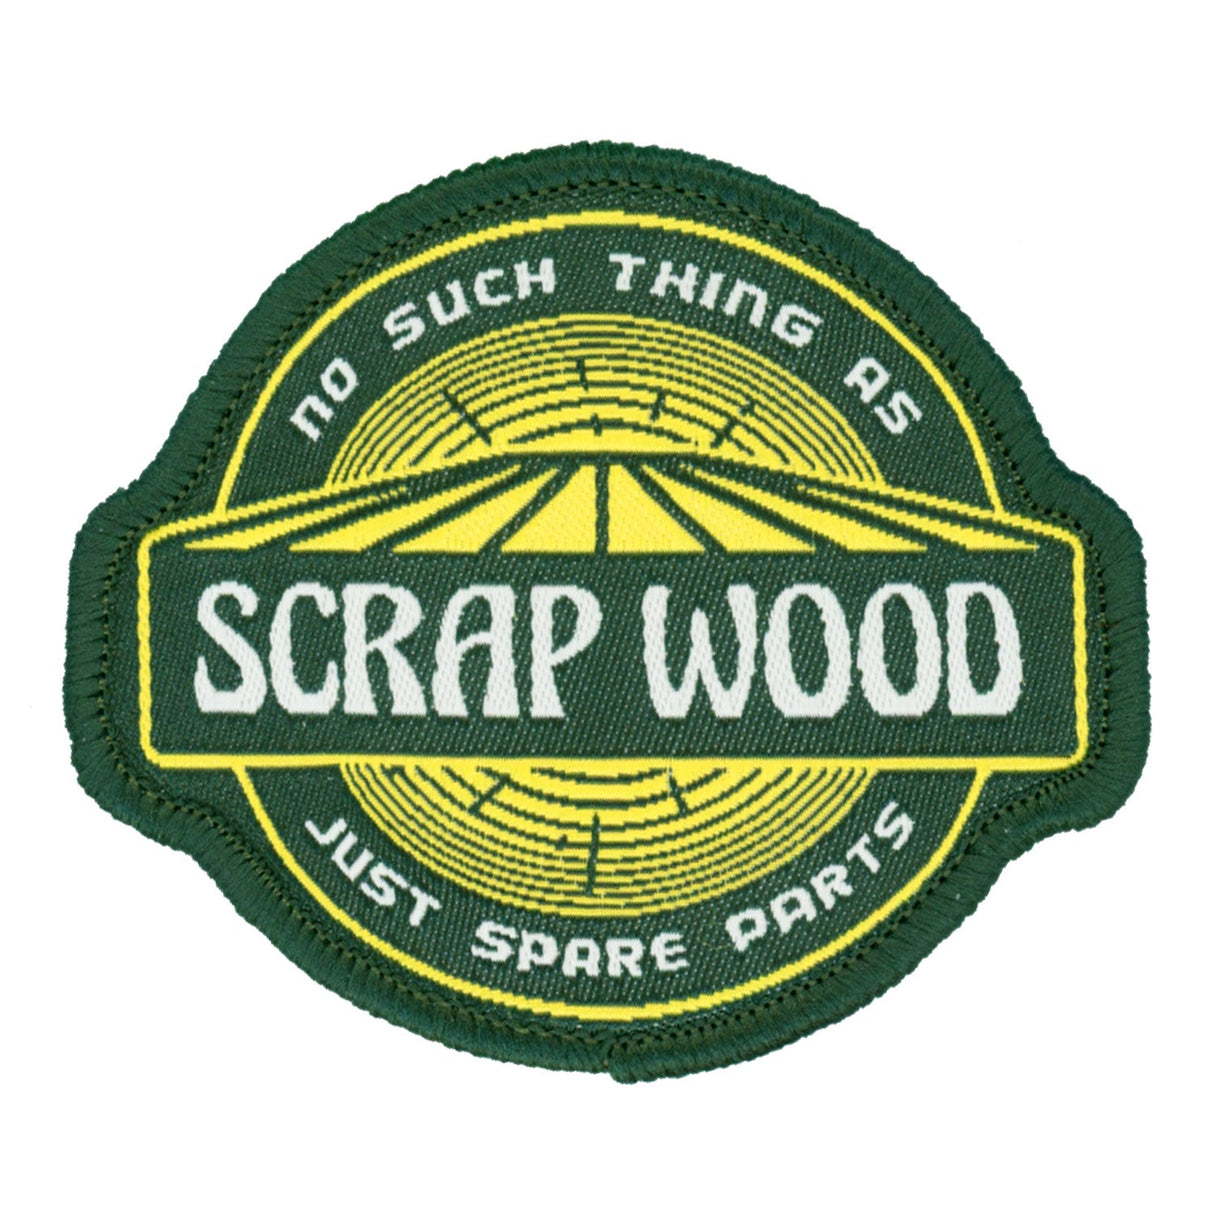 No Such Thing as Scrap Wood Patch